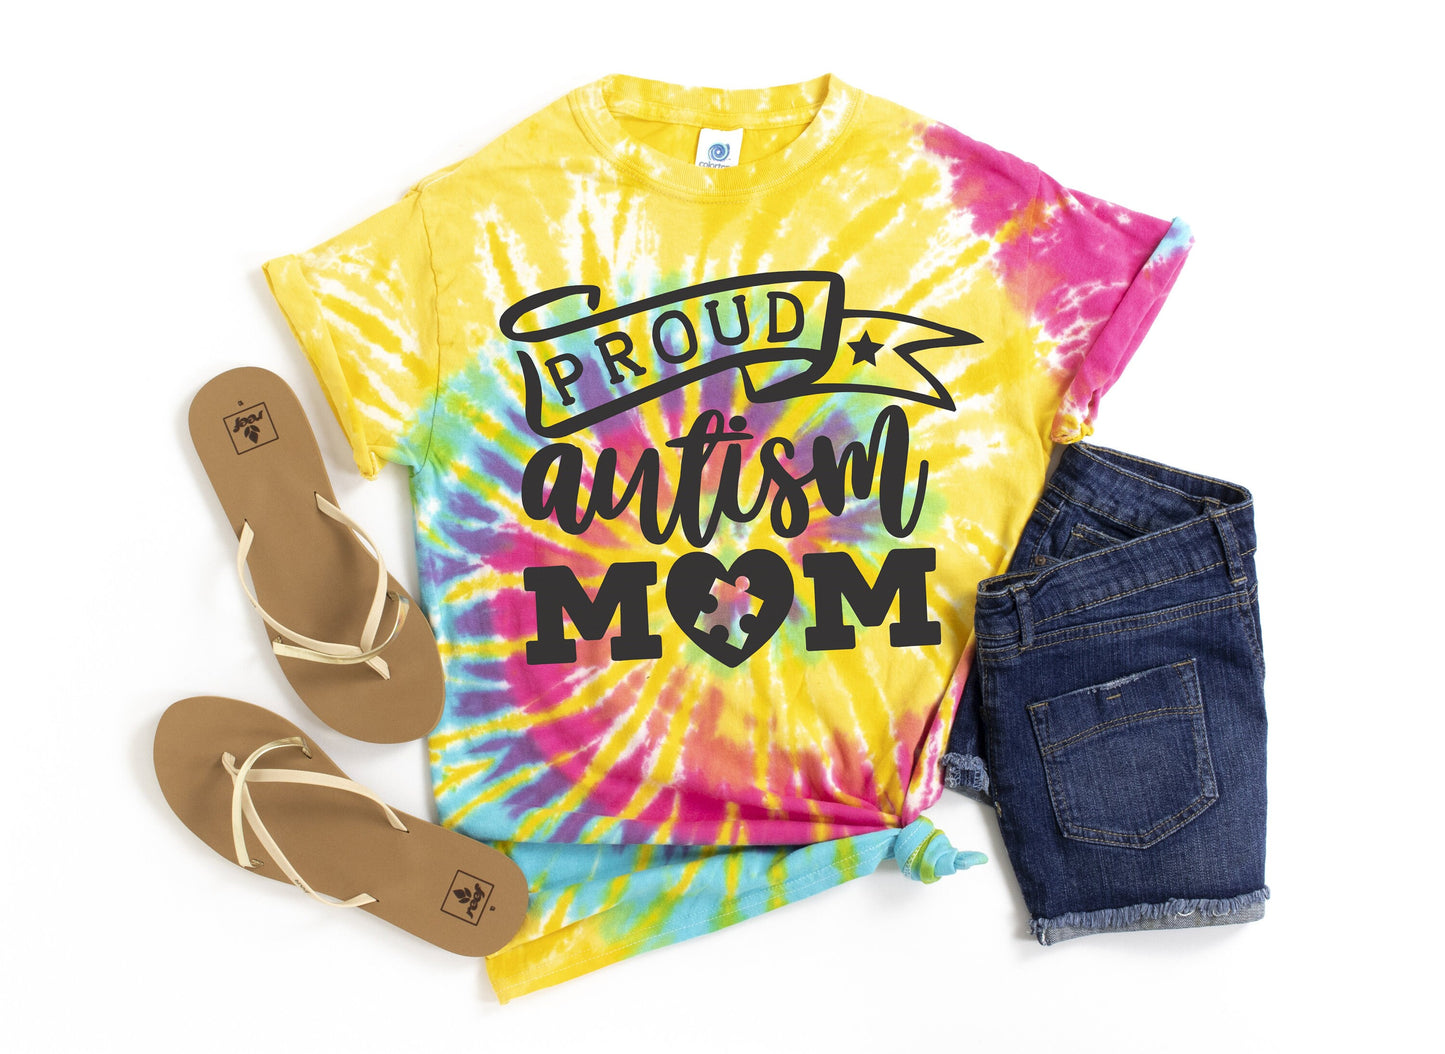 Proud Autism Mom Tie Dye t-shirt - Kids and Adults Sizes - Autism Mom Shirt - Autism Awareness - Autism Mama Bear Shirt - Autism Support